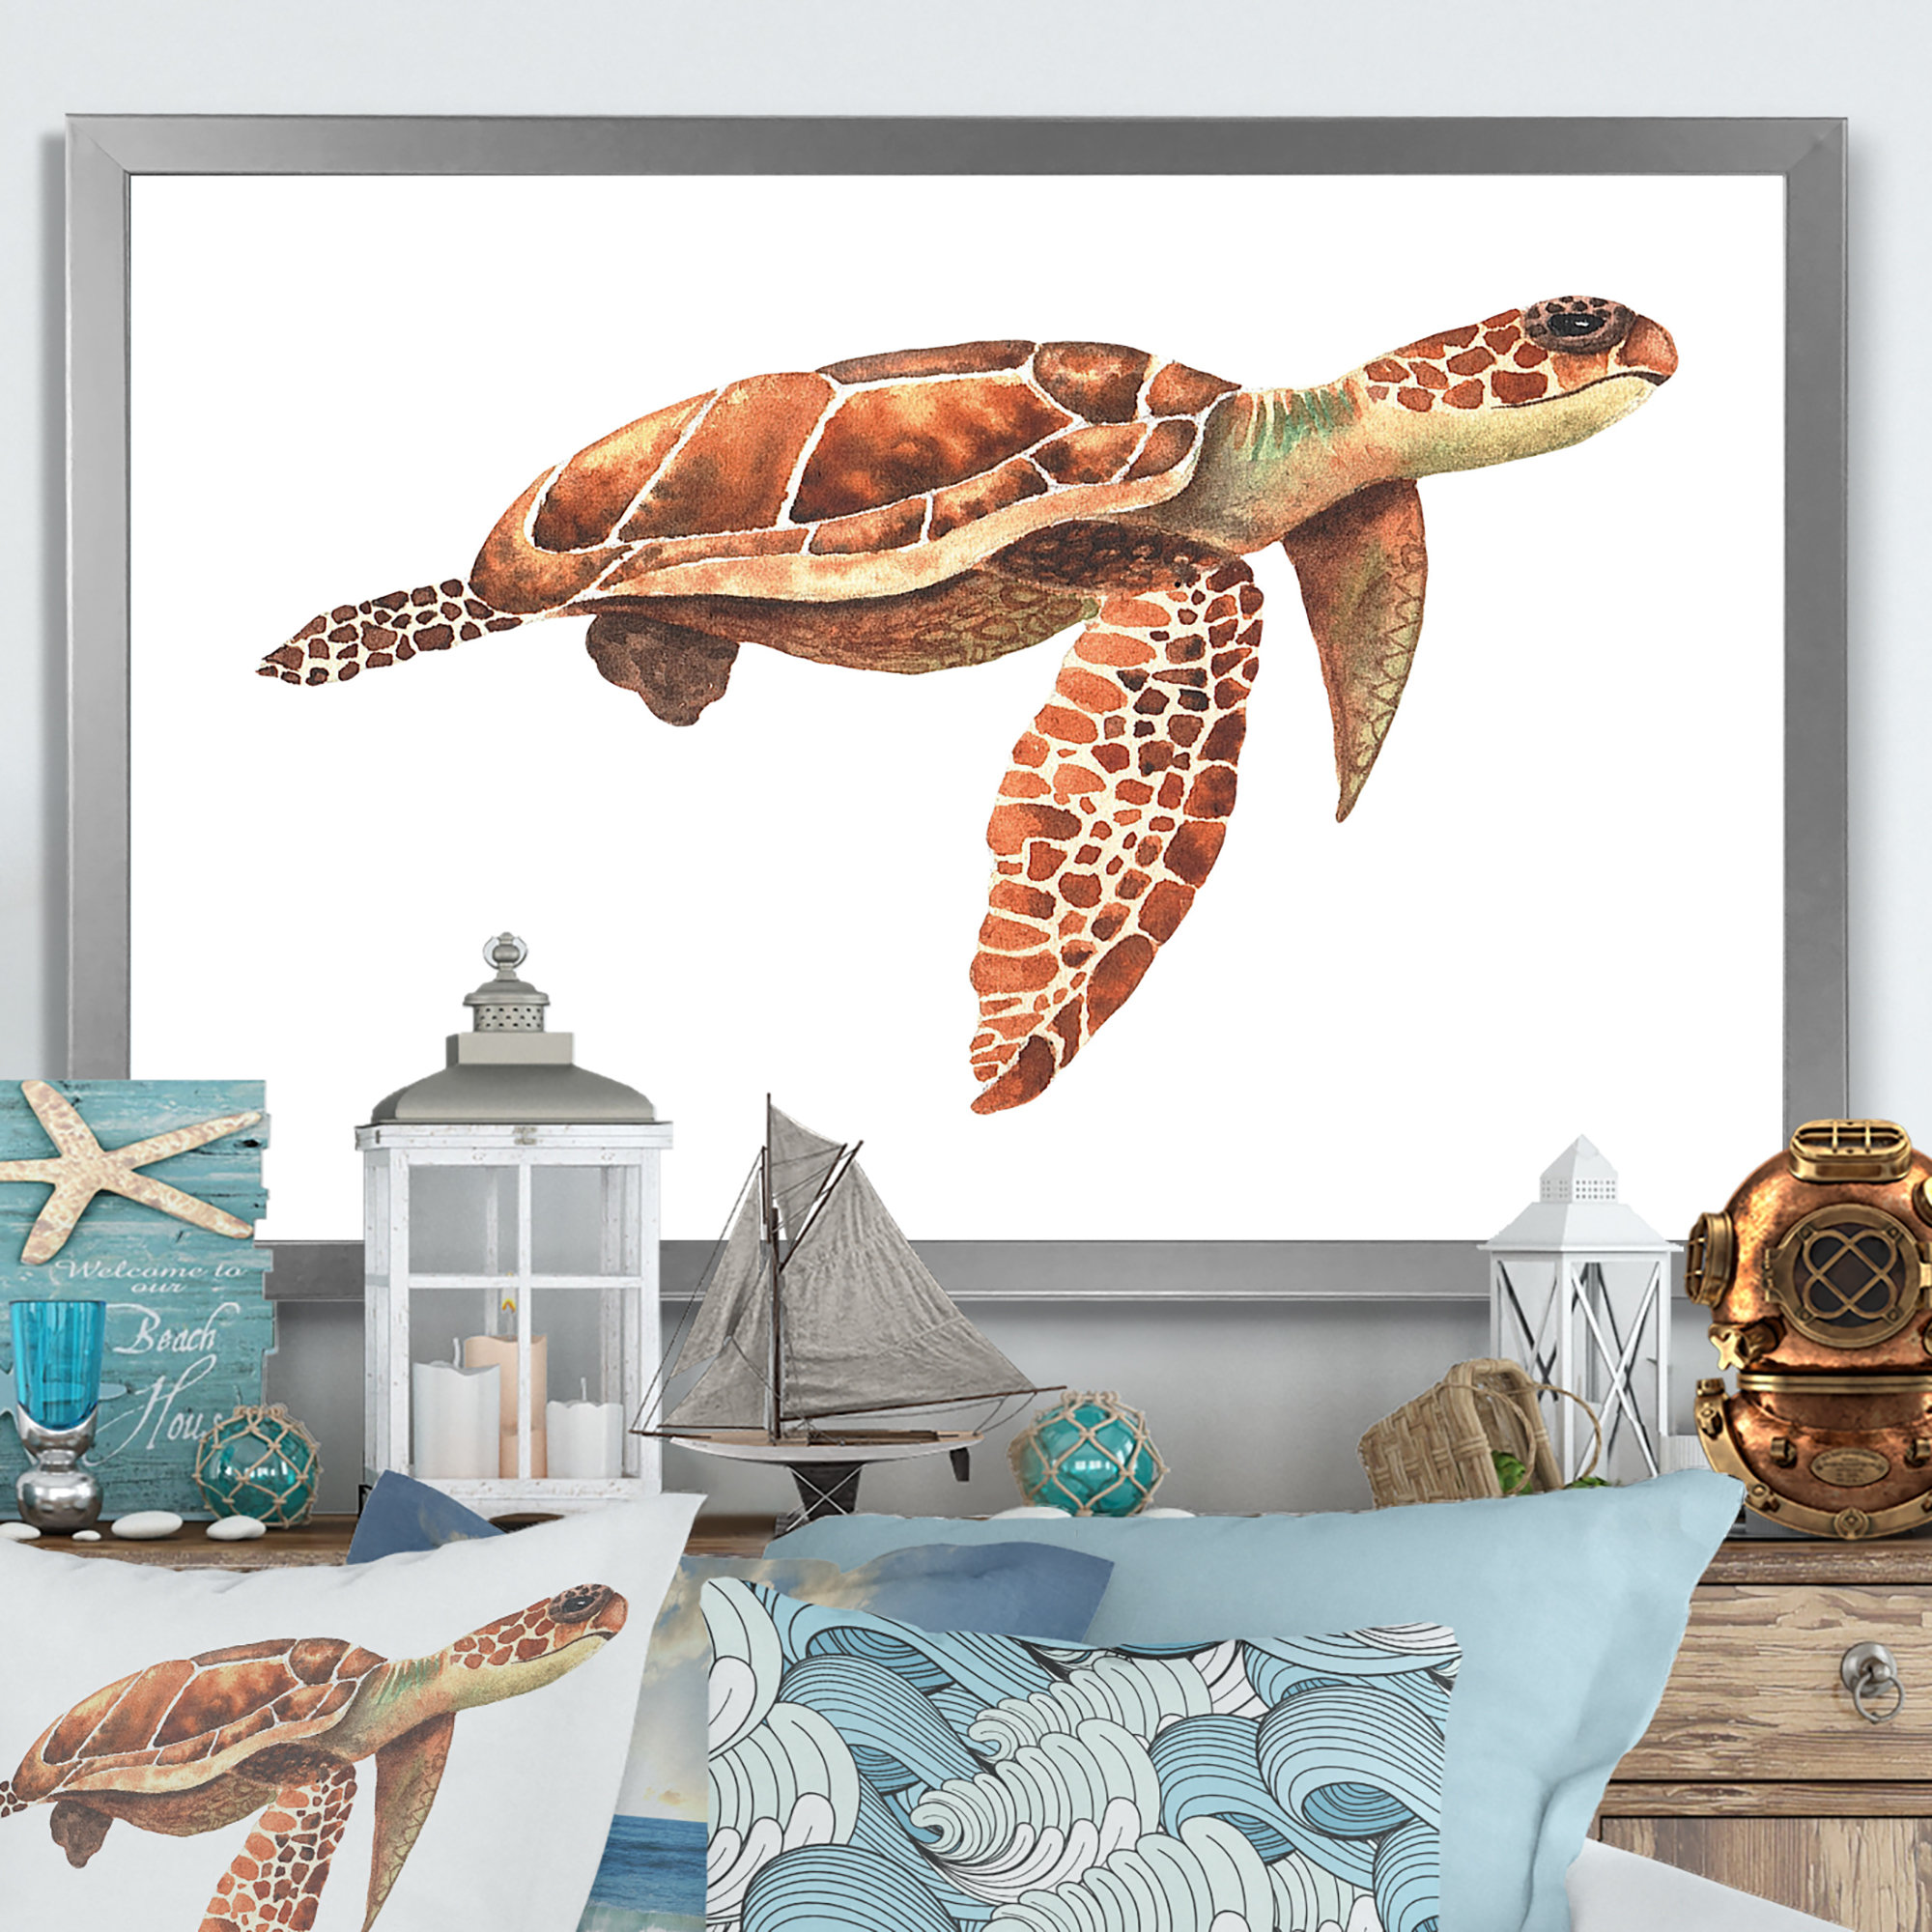 Cute Brown Sea Turtle - Print On Canvas Bay Isle Home Format: Silver Closed Corner Framed, Size: 8 H x 12 W x 1 D